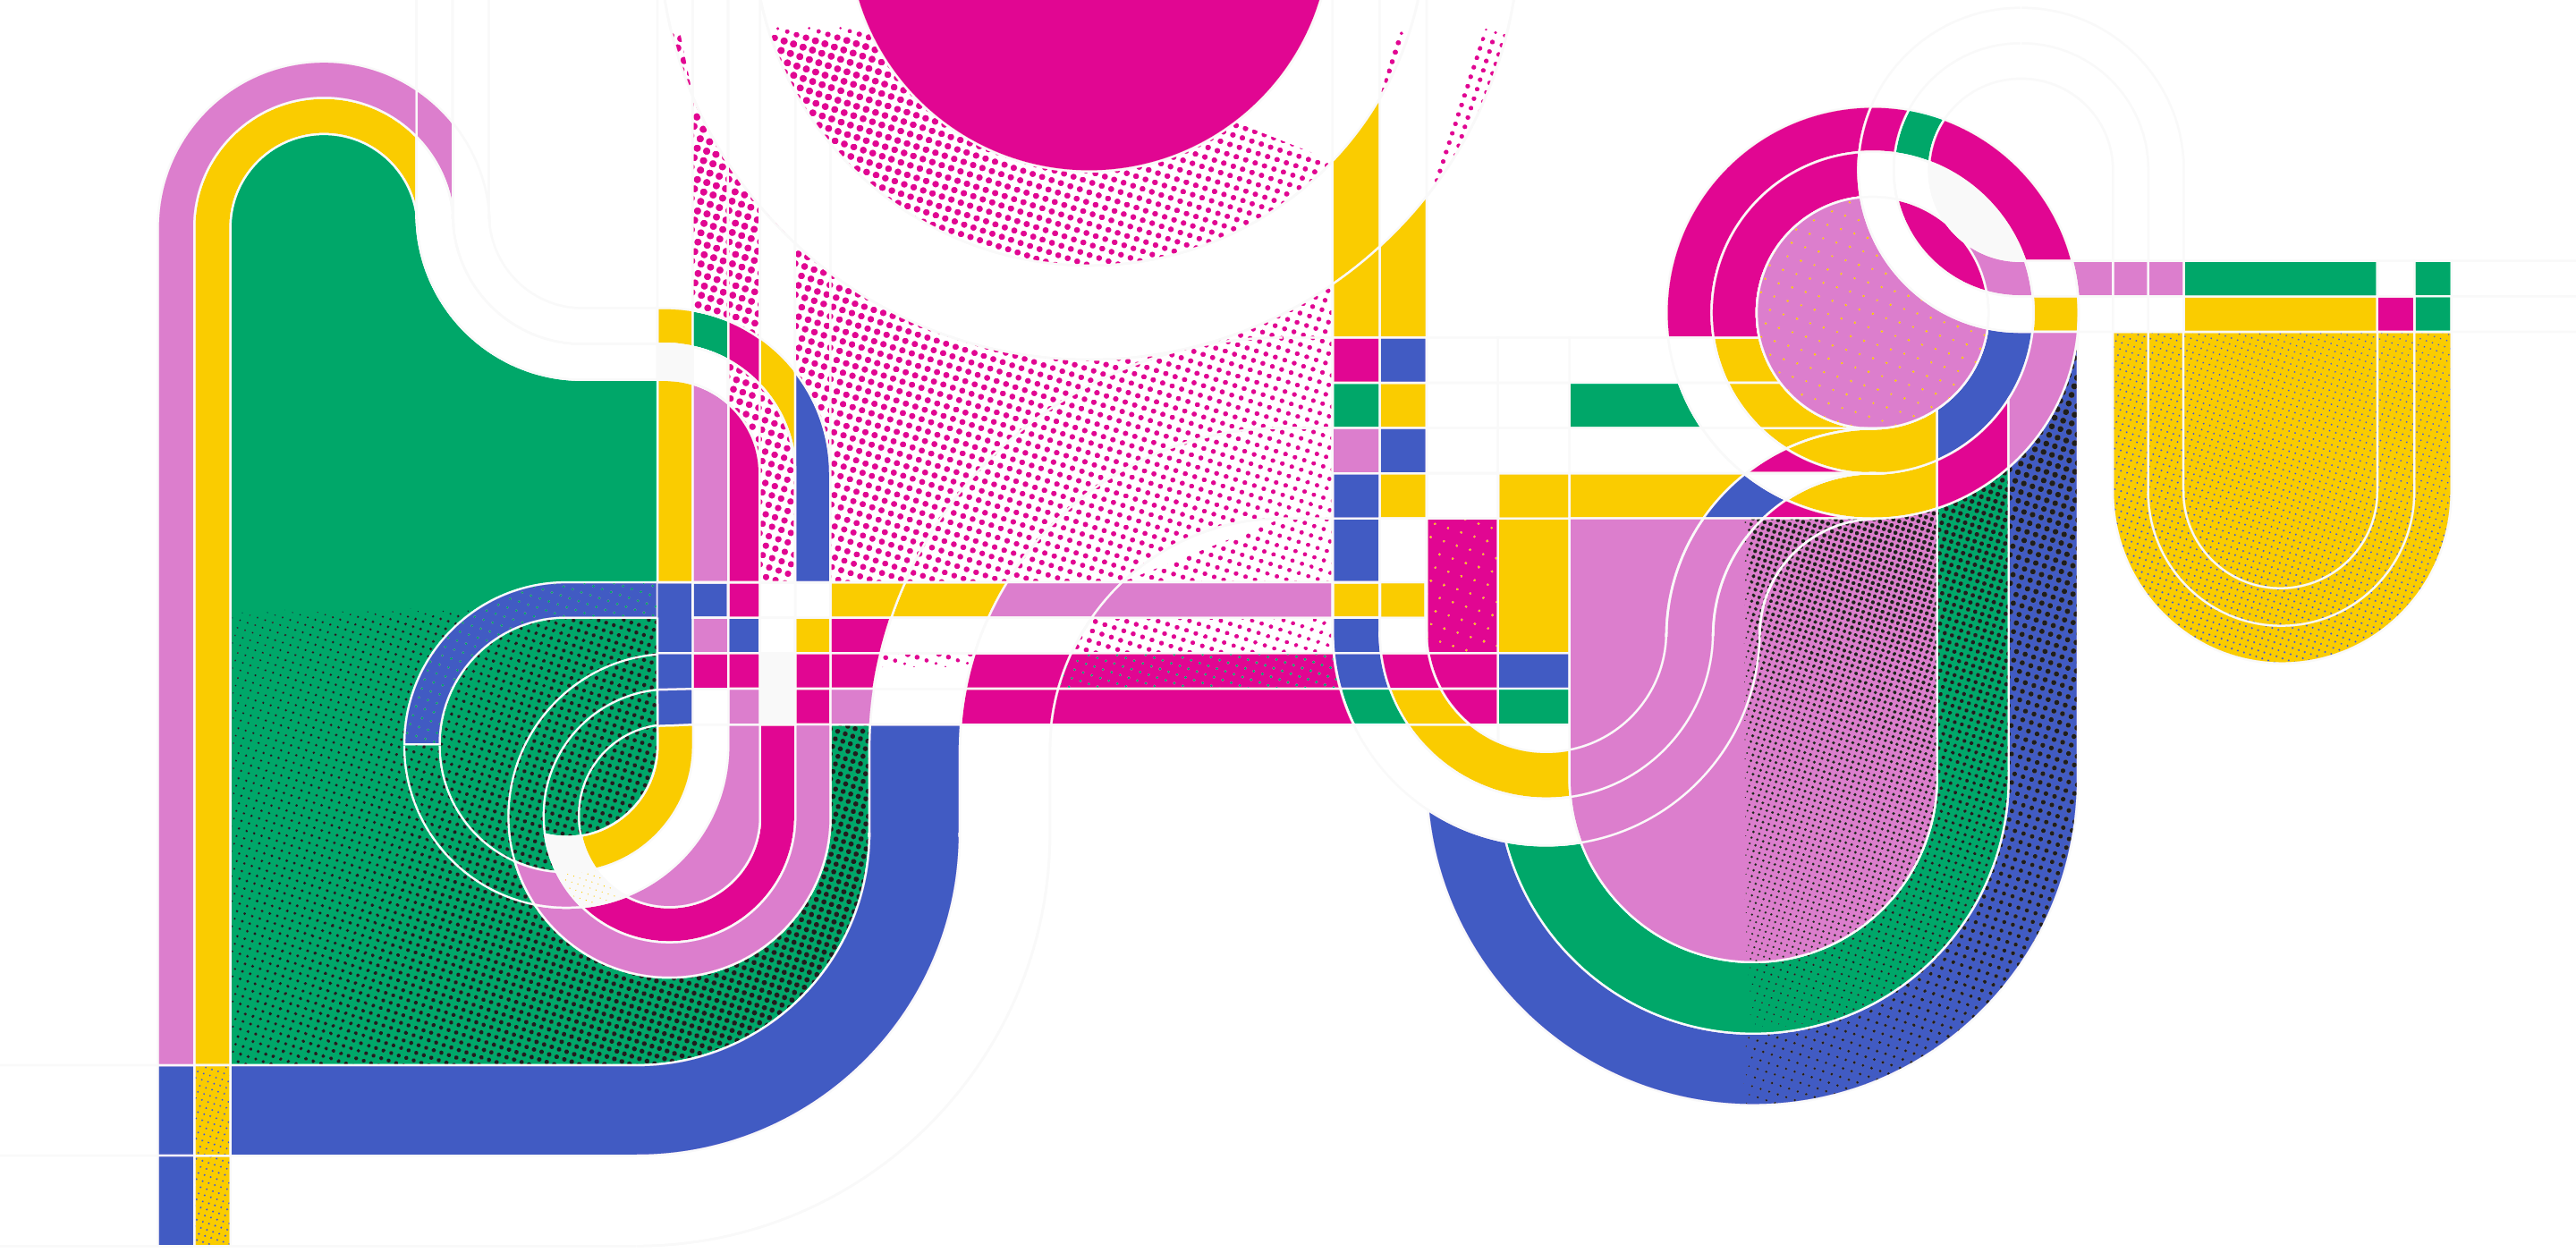 Abstract illustration depicting winding roadways and intersections in bright colors